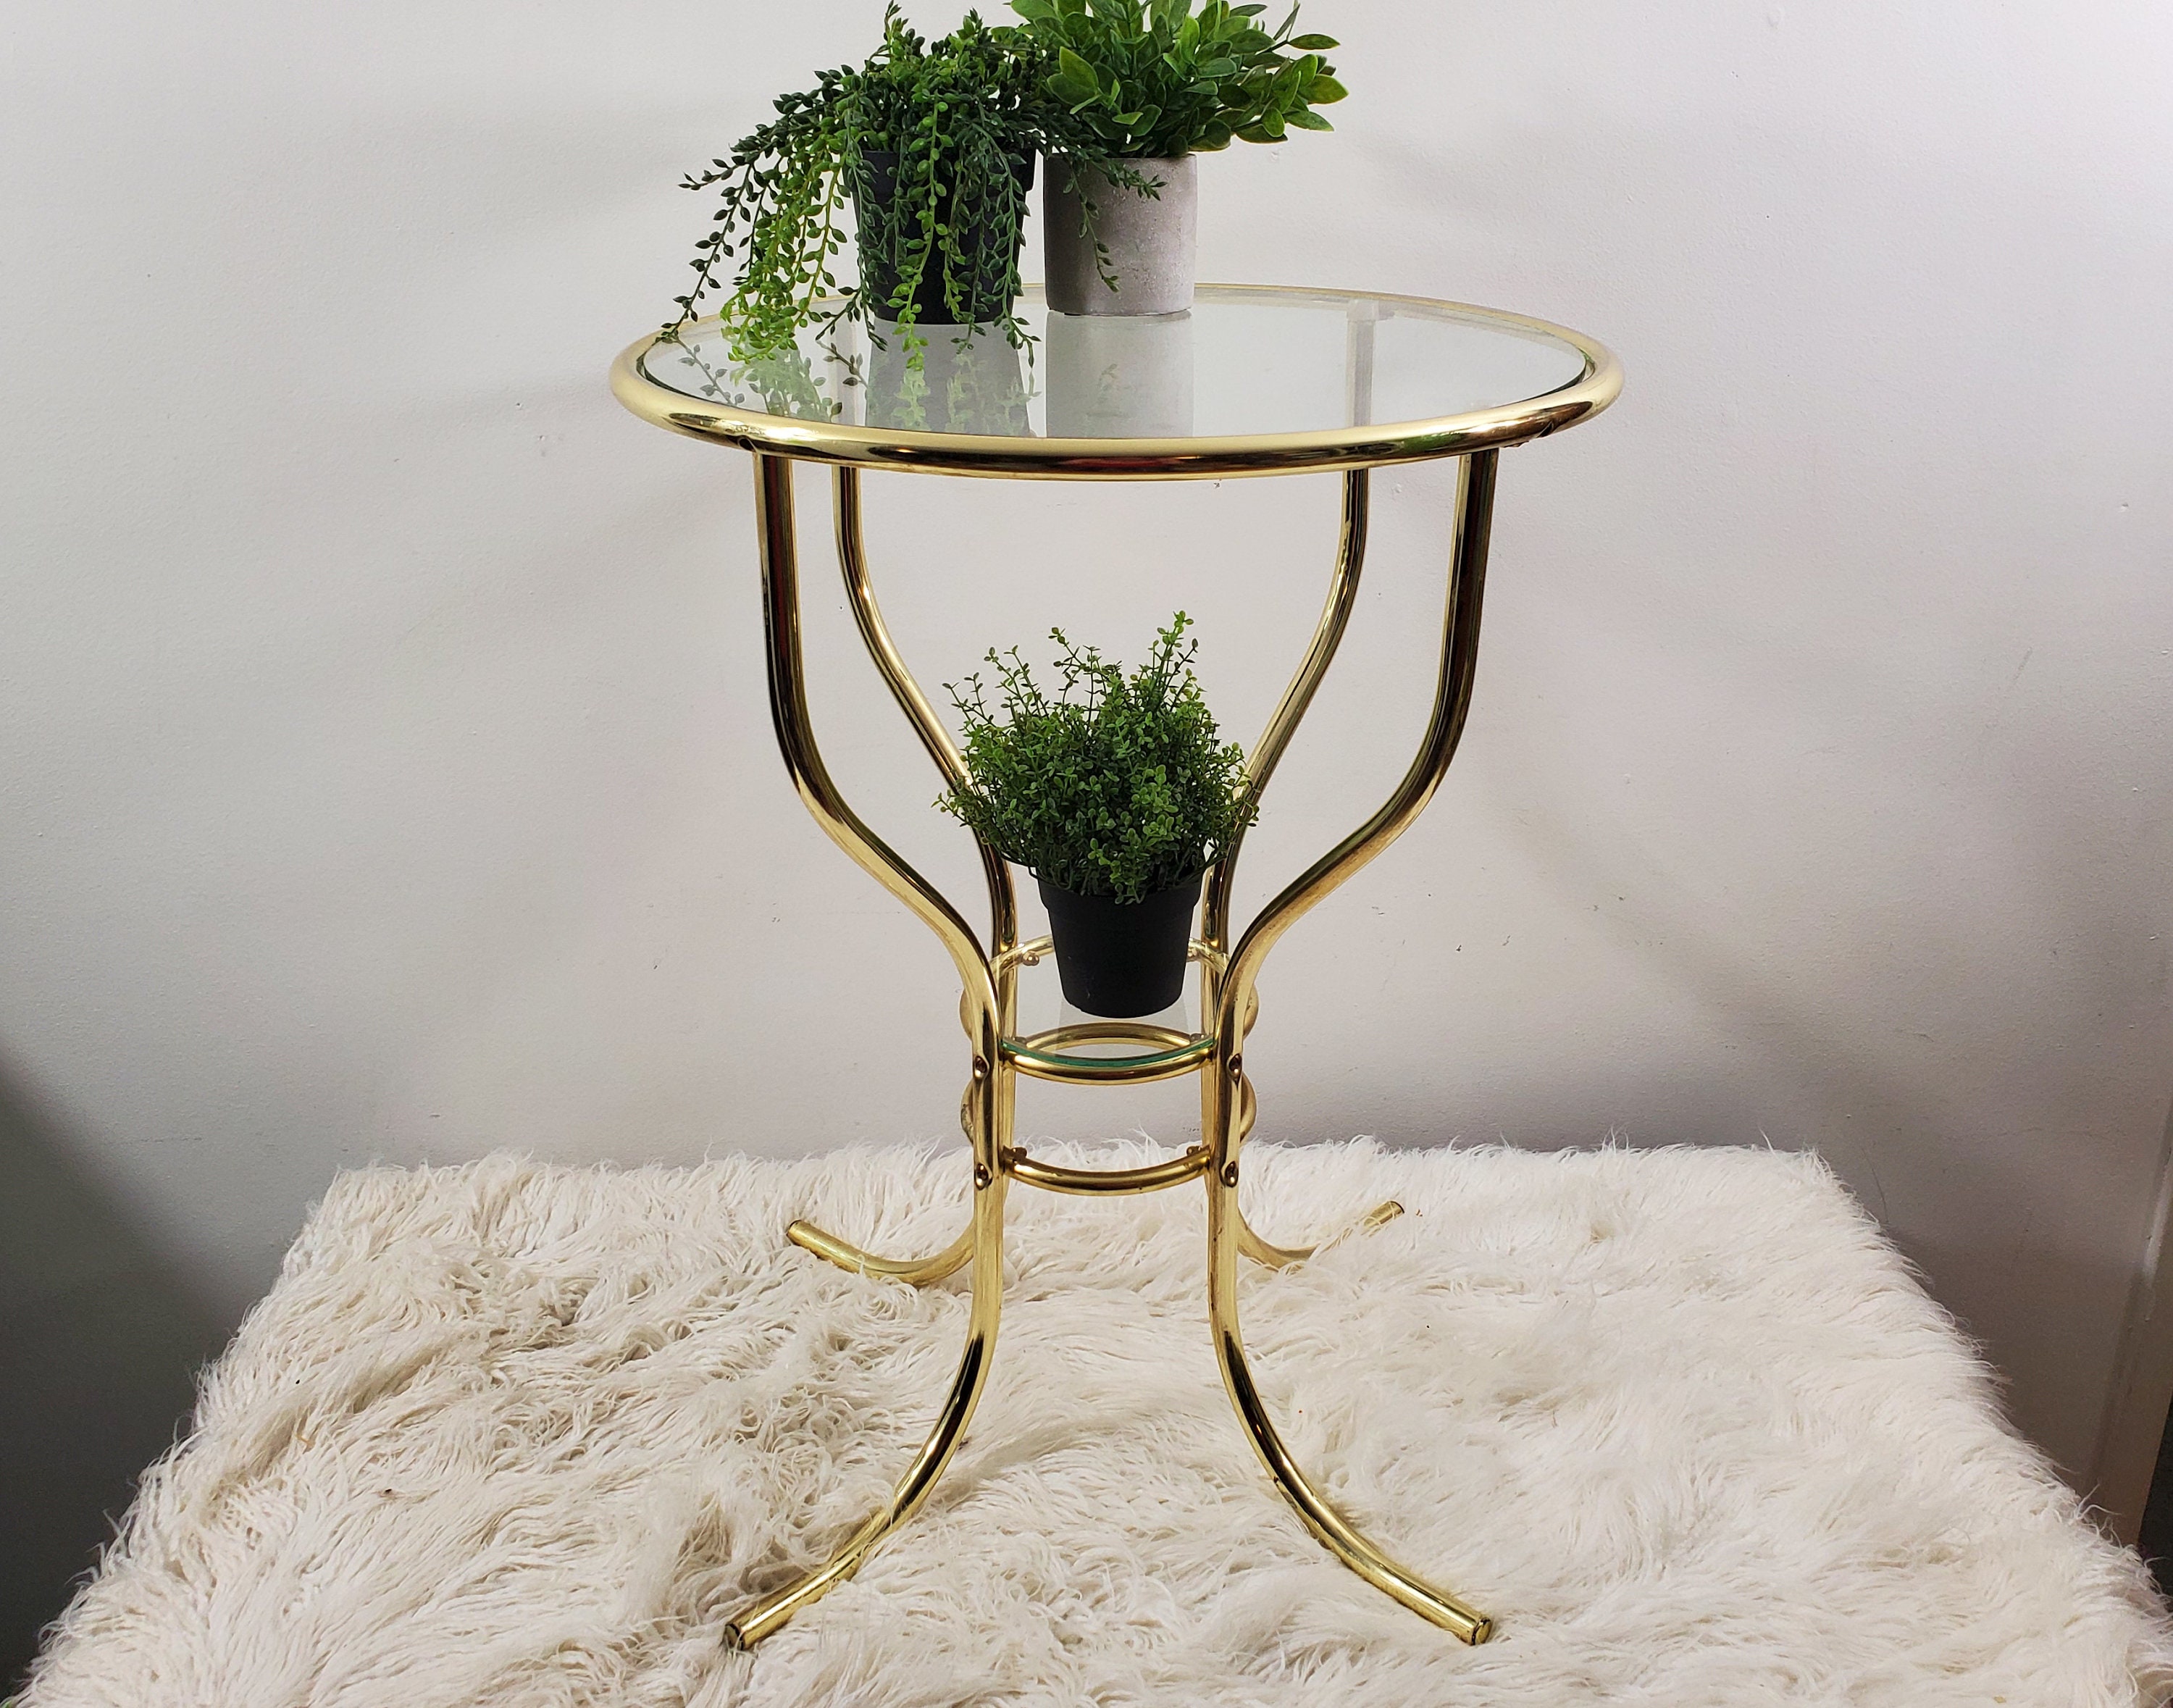 Vintage 80s Era Brass Plated Metal and Glass 2 Level Plant 